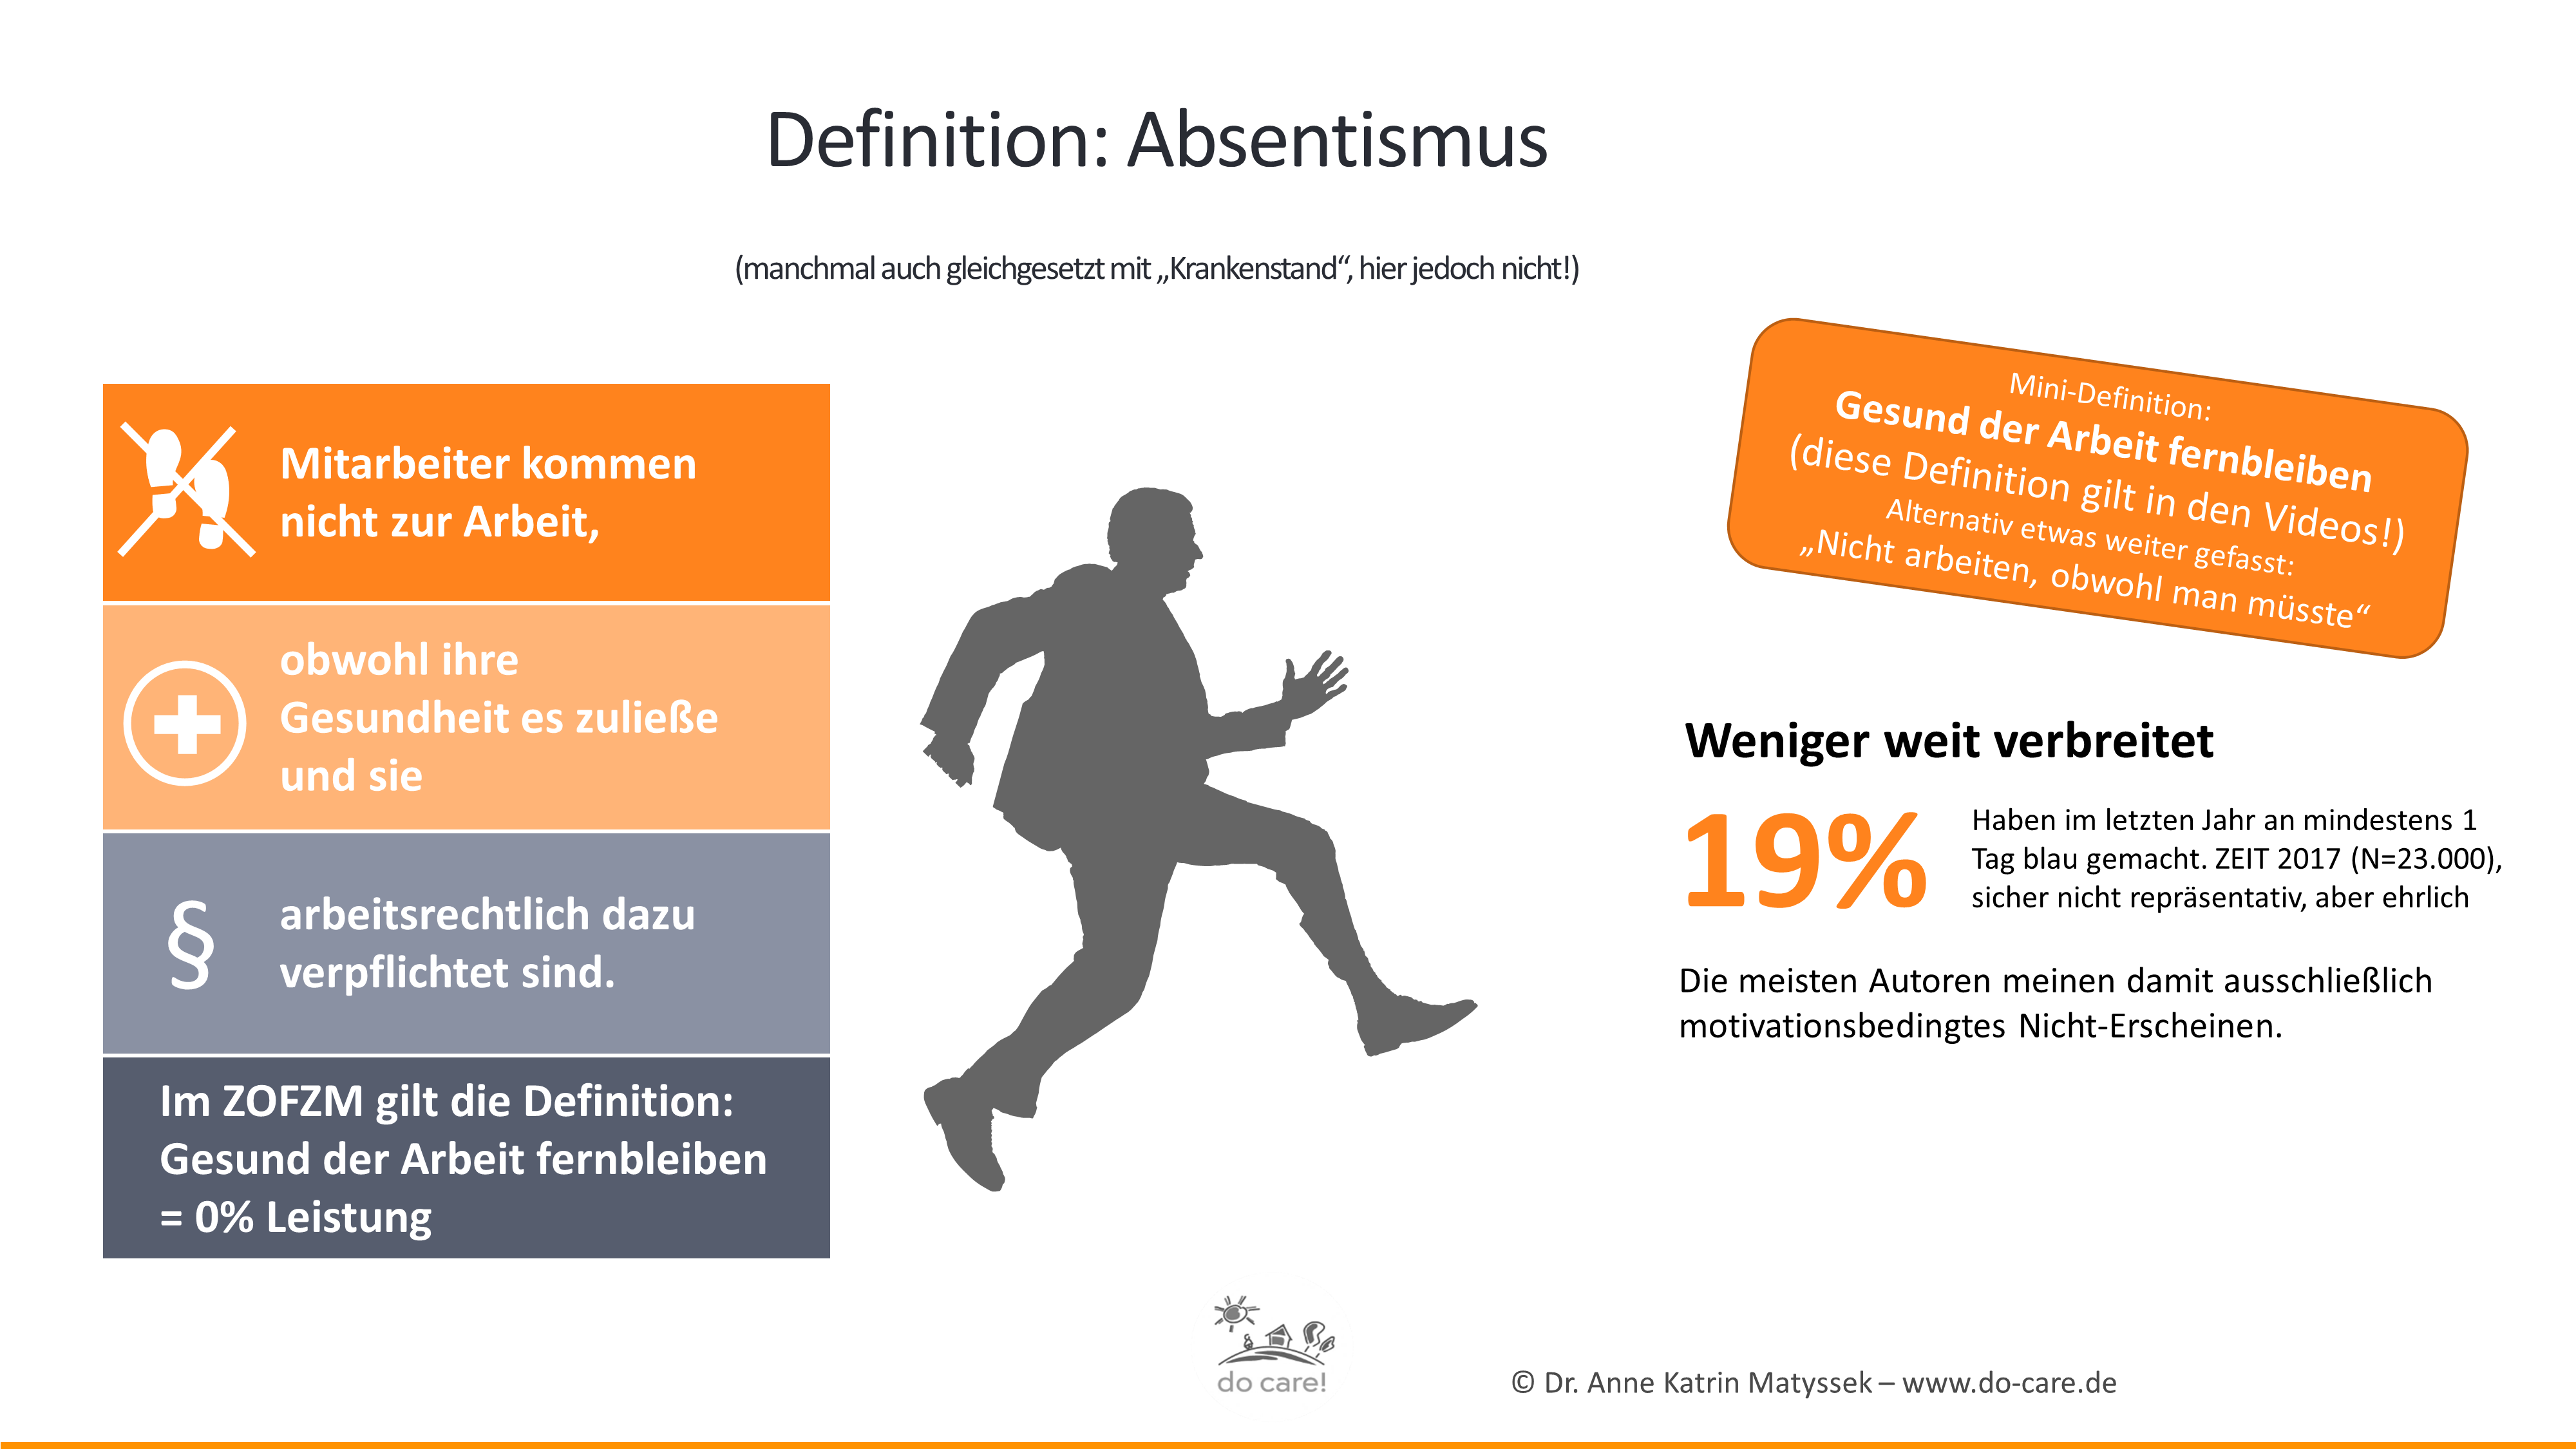 Absentismus: Definition